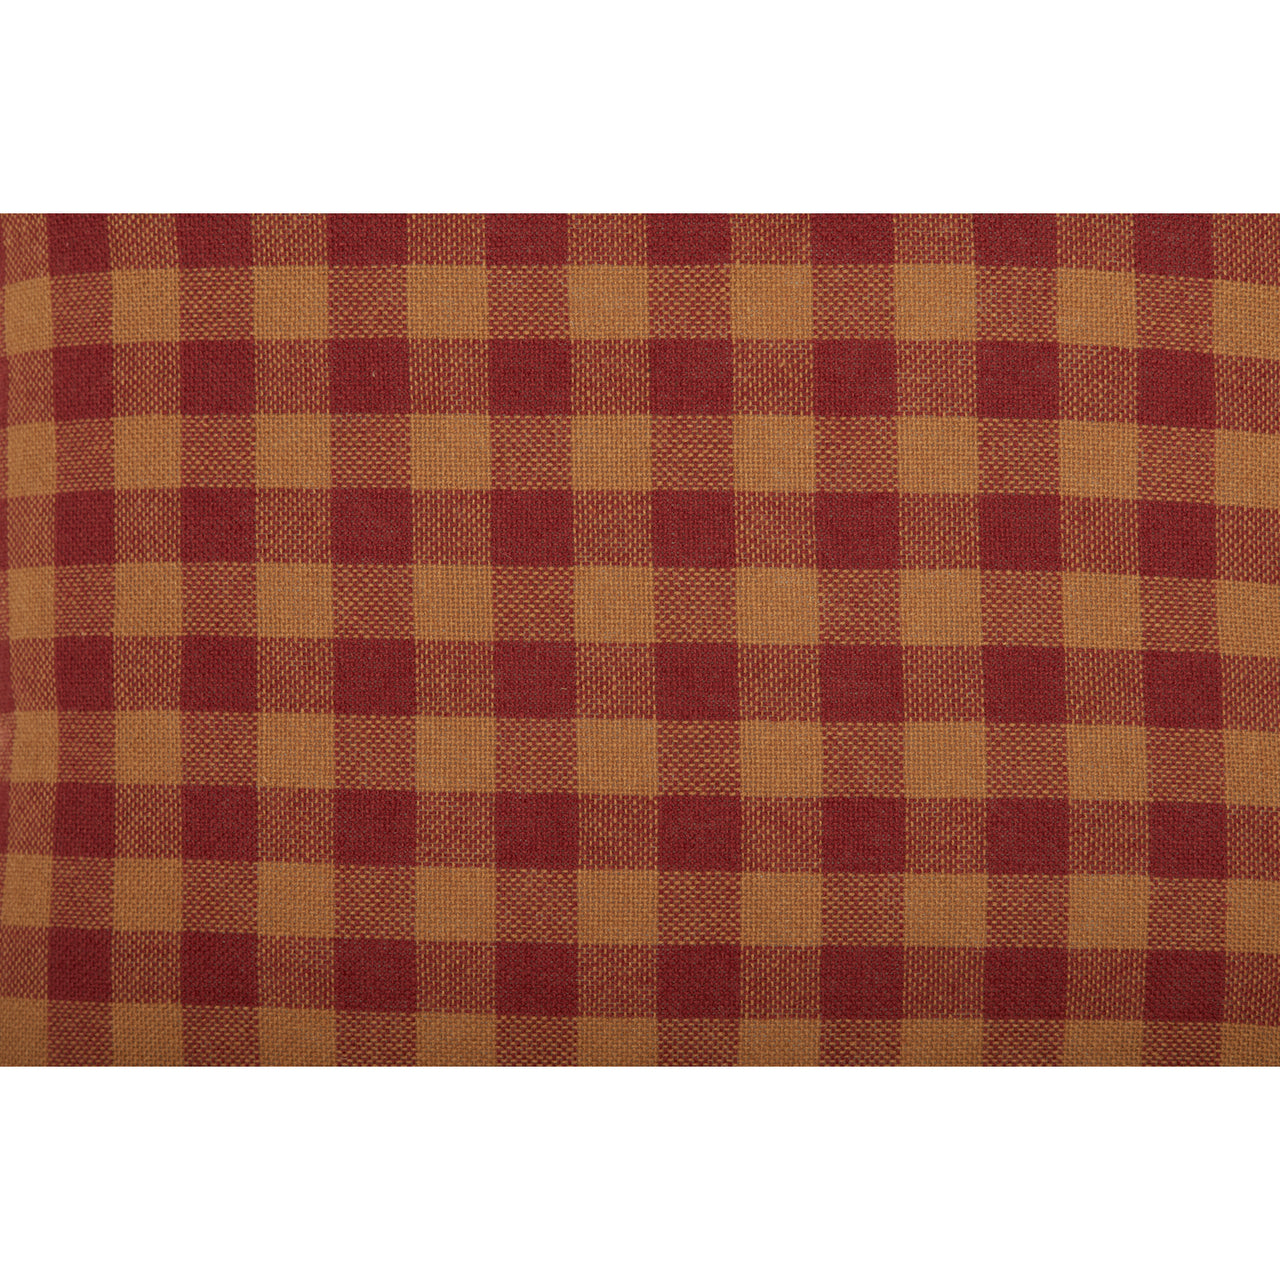 Burgundy Check King Pillow Case Set of 2 21x40 VHC Brands